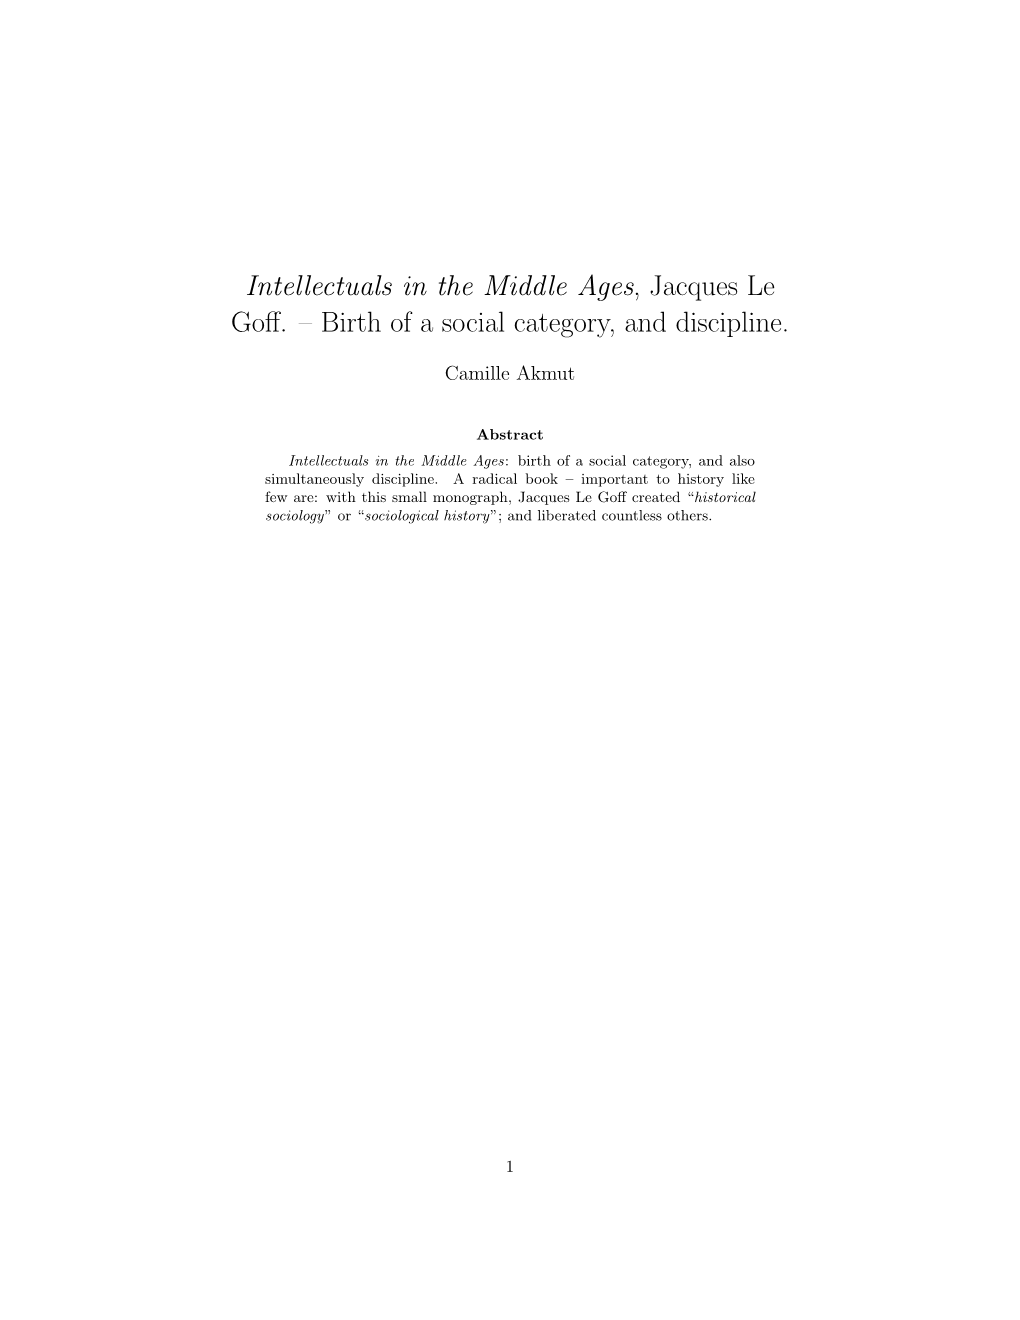 Intellectuals in the Middle Ages, Jacques Le Goff